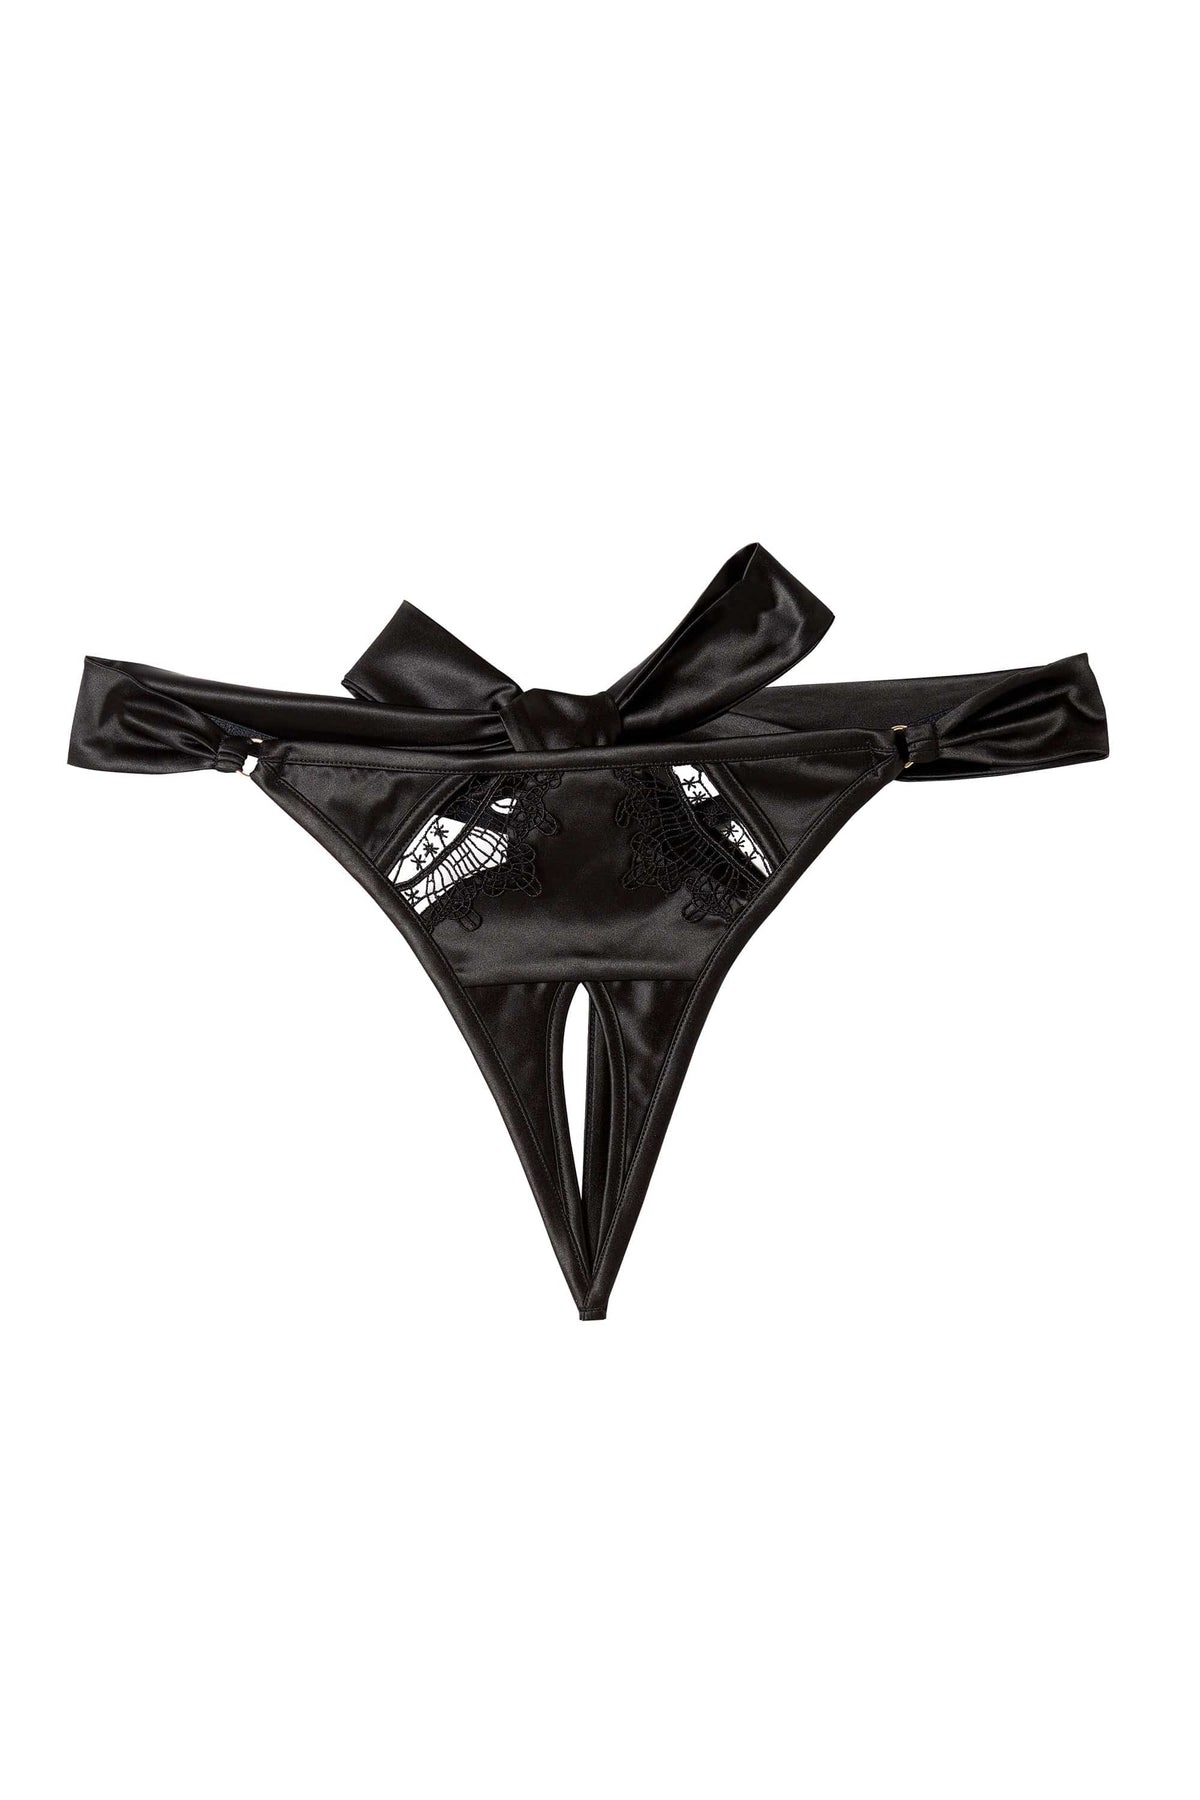 Playful Promises Wren Black Satin and Lace Ouvert Thong Panty 03205 – The  Bra Genie